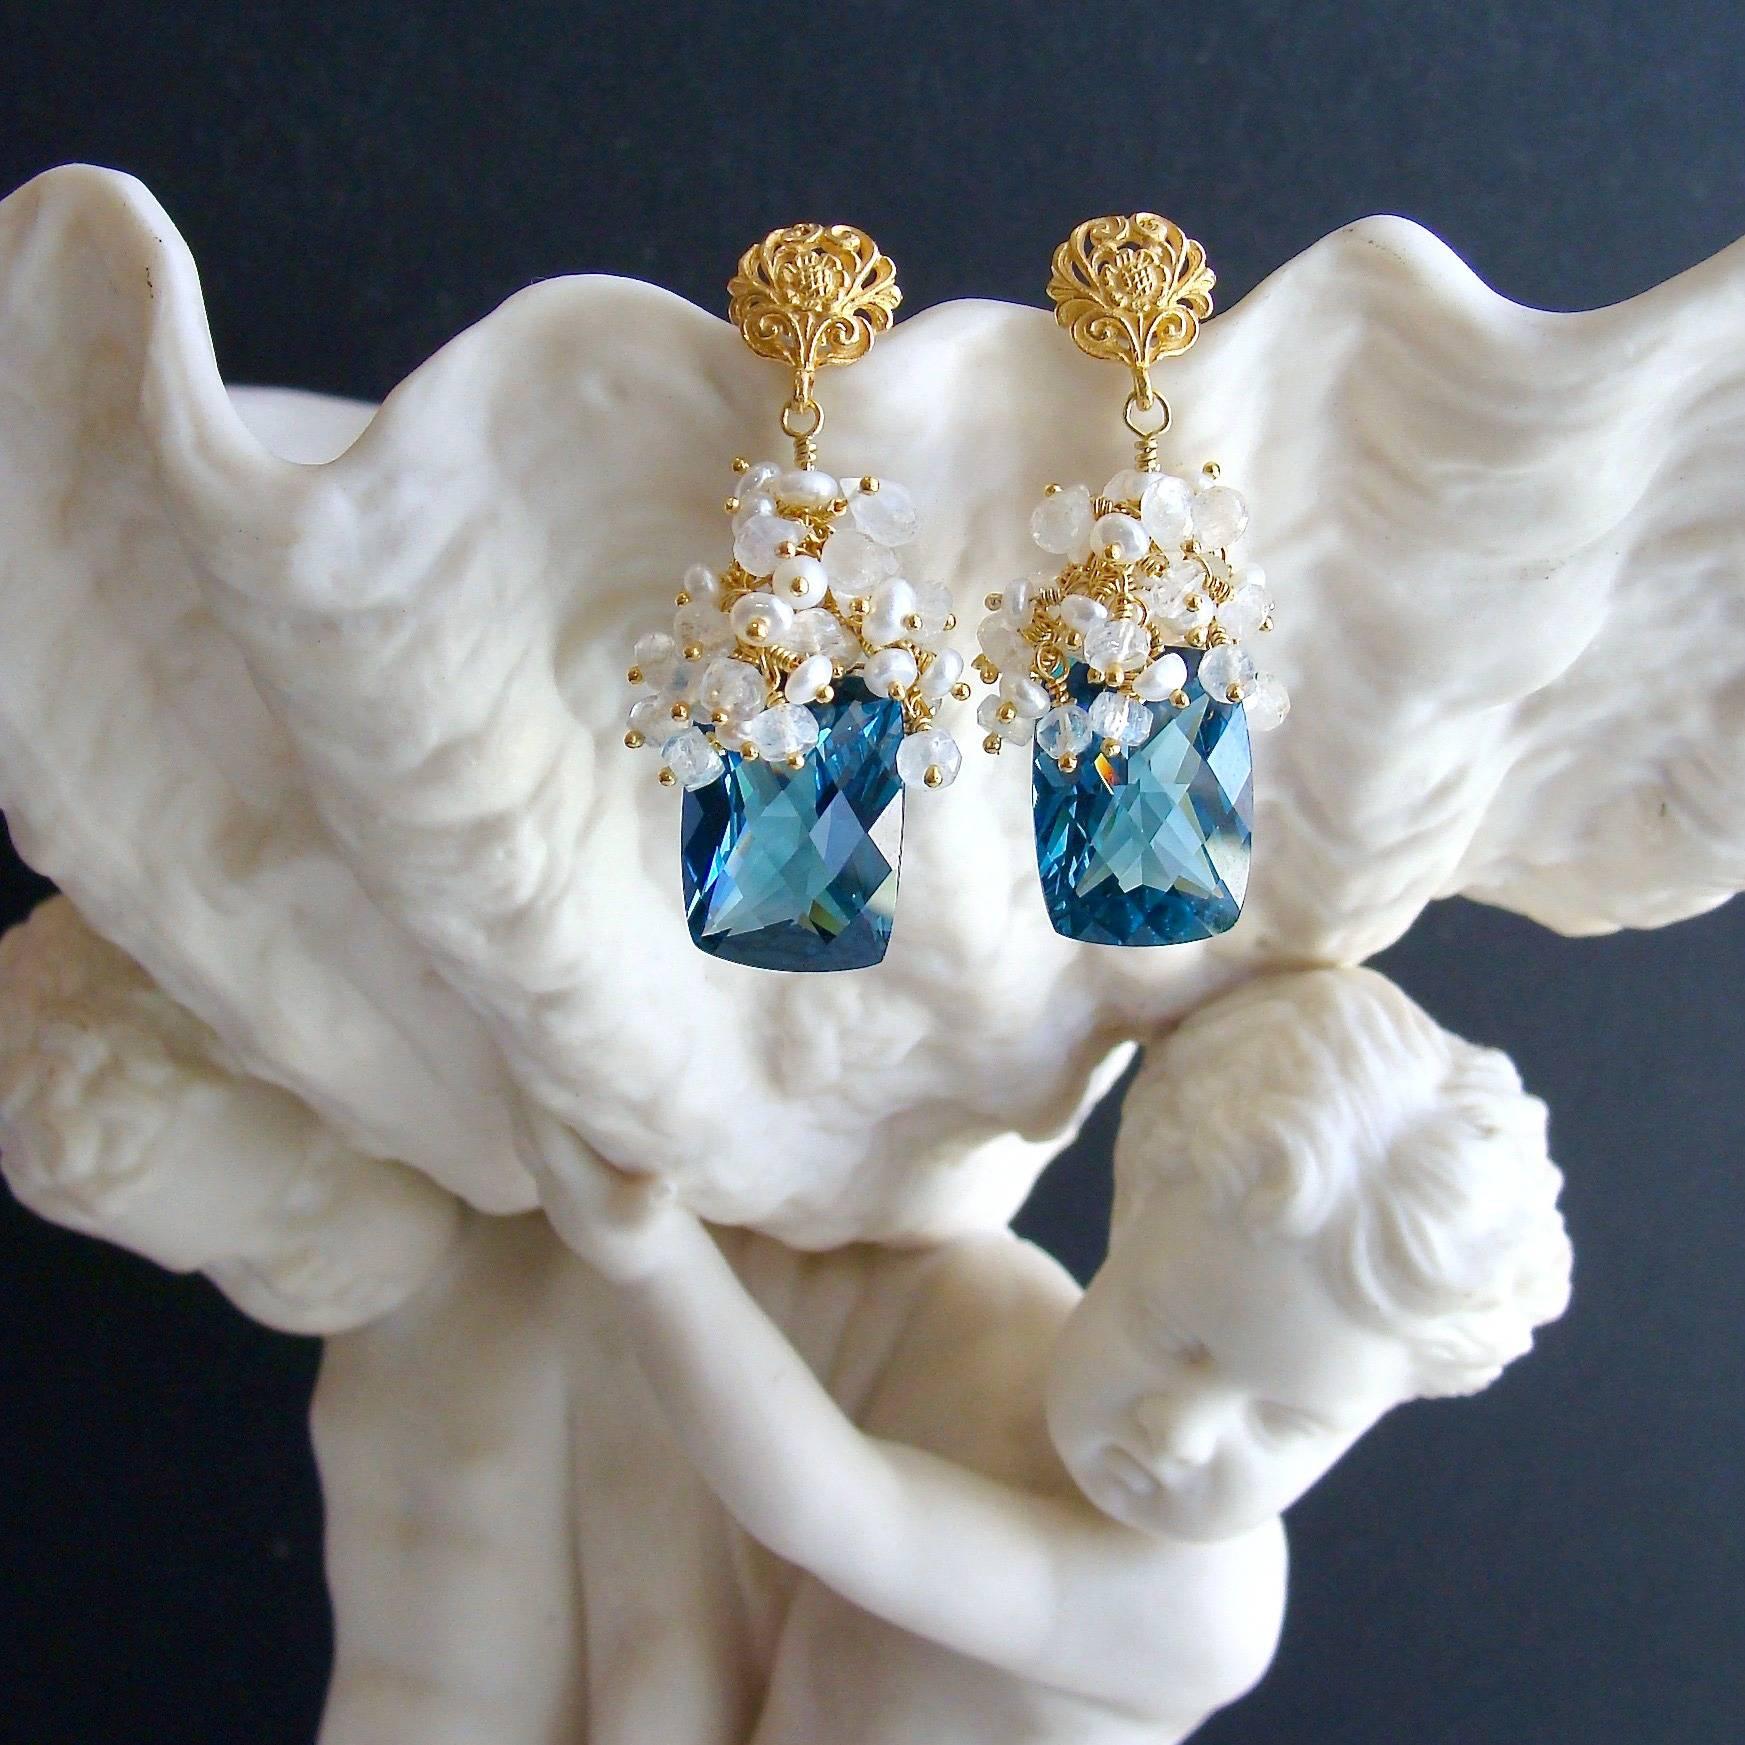 Dione VI Earrings.

These stunning earrings were named after one of the Greek Nereides or sea goddesses – Dione (The Divine).  

Reminiscent of the ocean – Luxe harlequin faceted London blue topaz baguettes are capped with a foamy froth of dainty